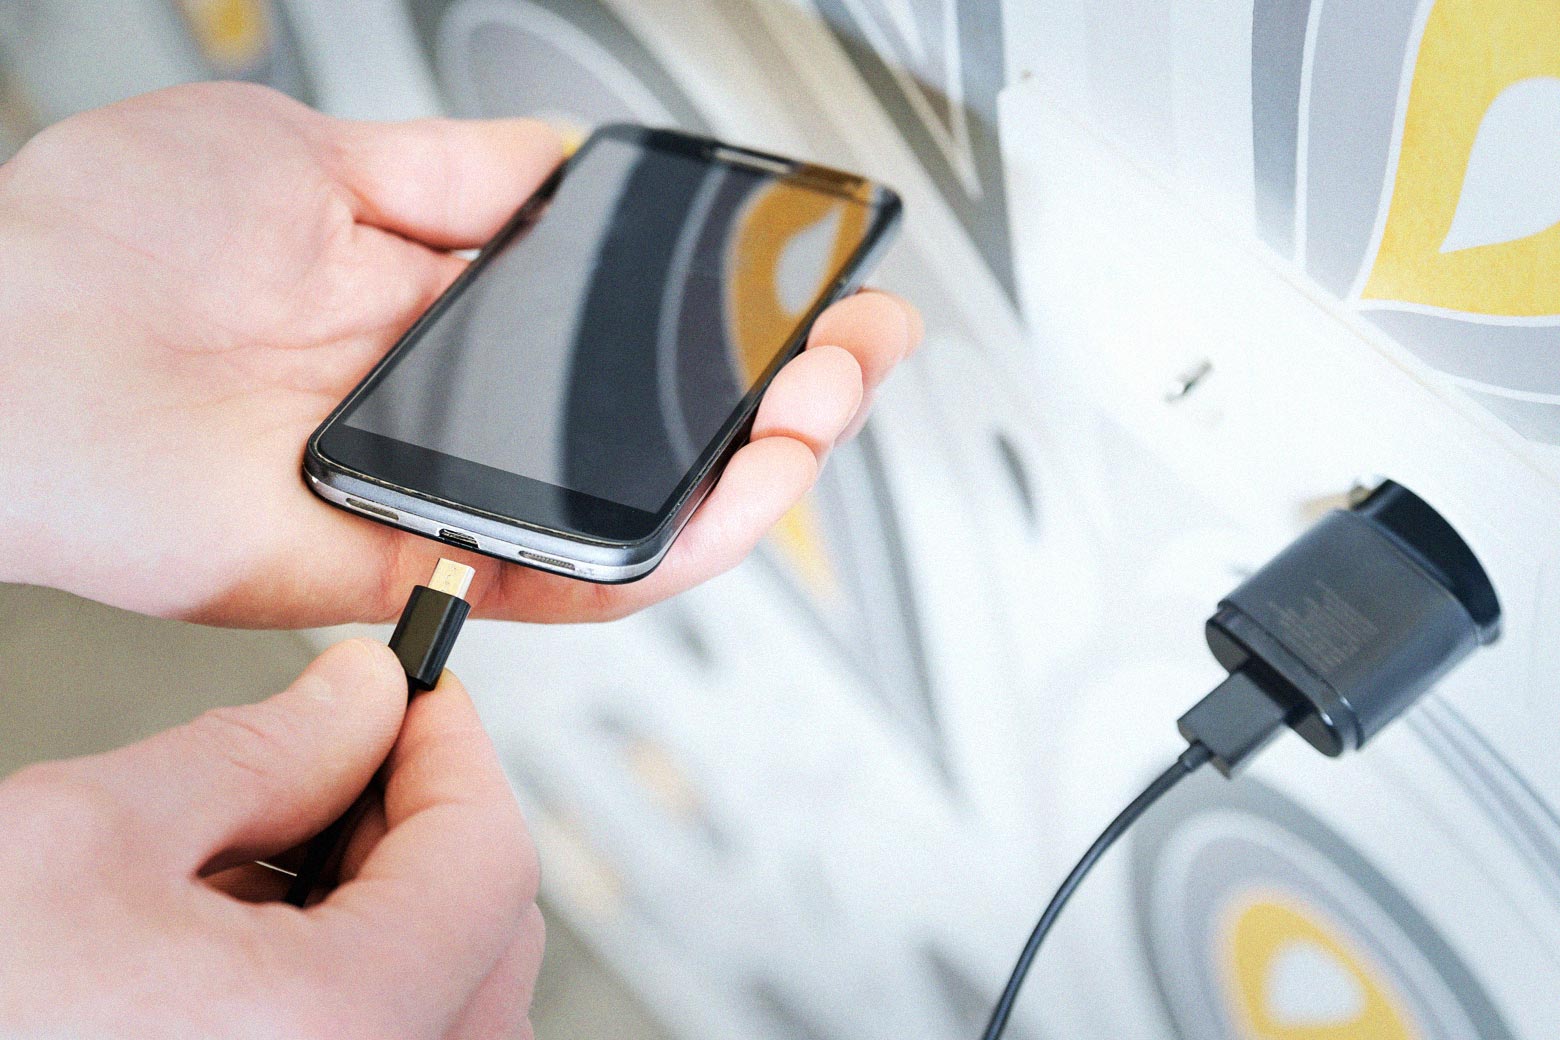 Actually, Charging Your Phone in a Public USB Port Is Fine